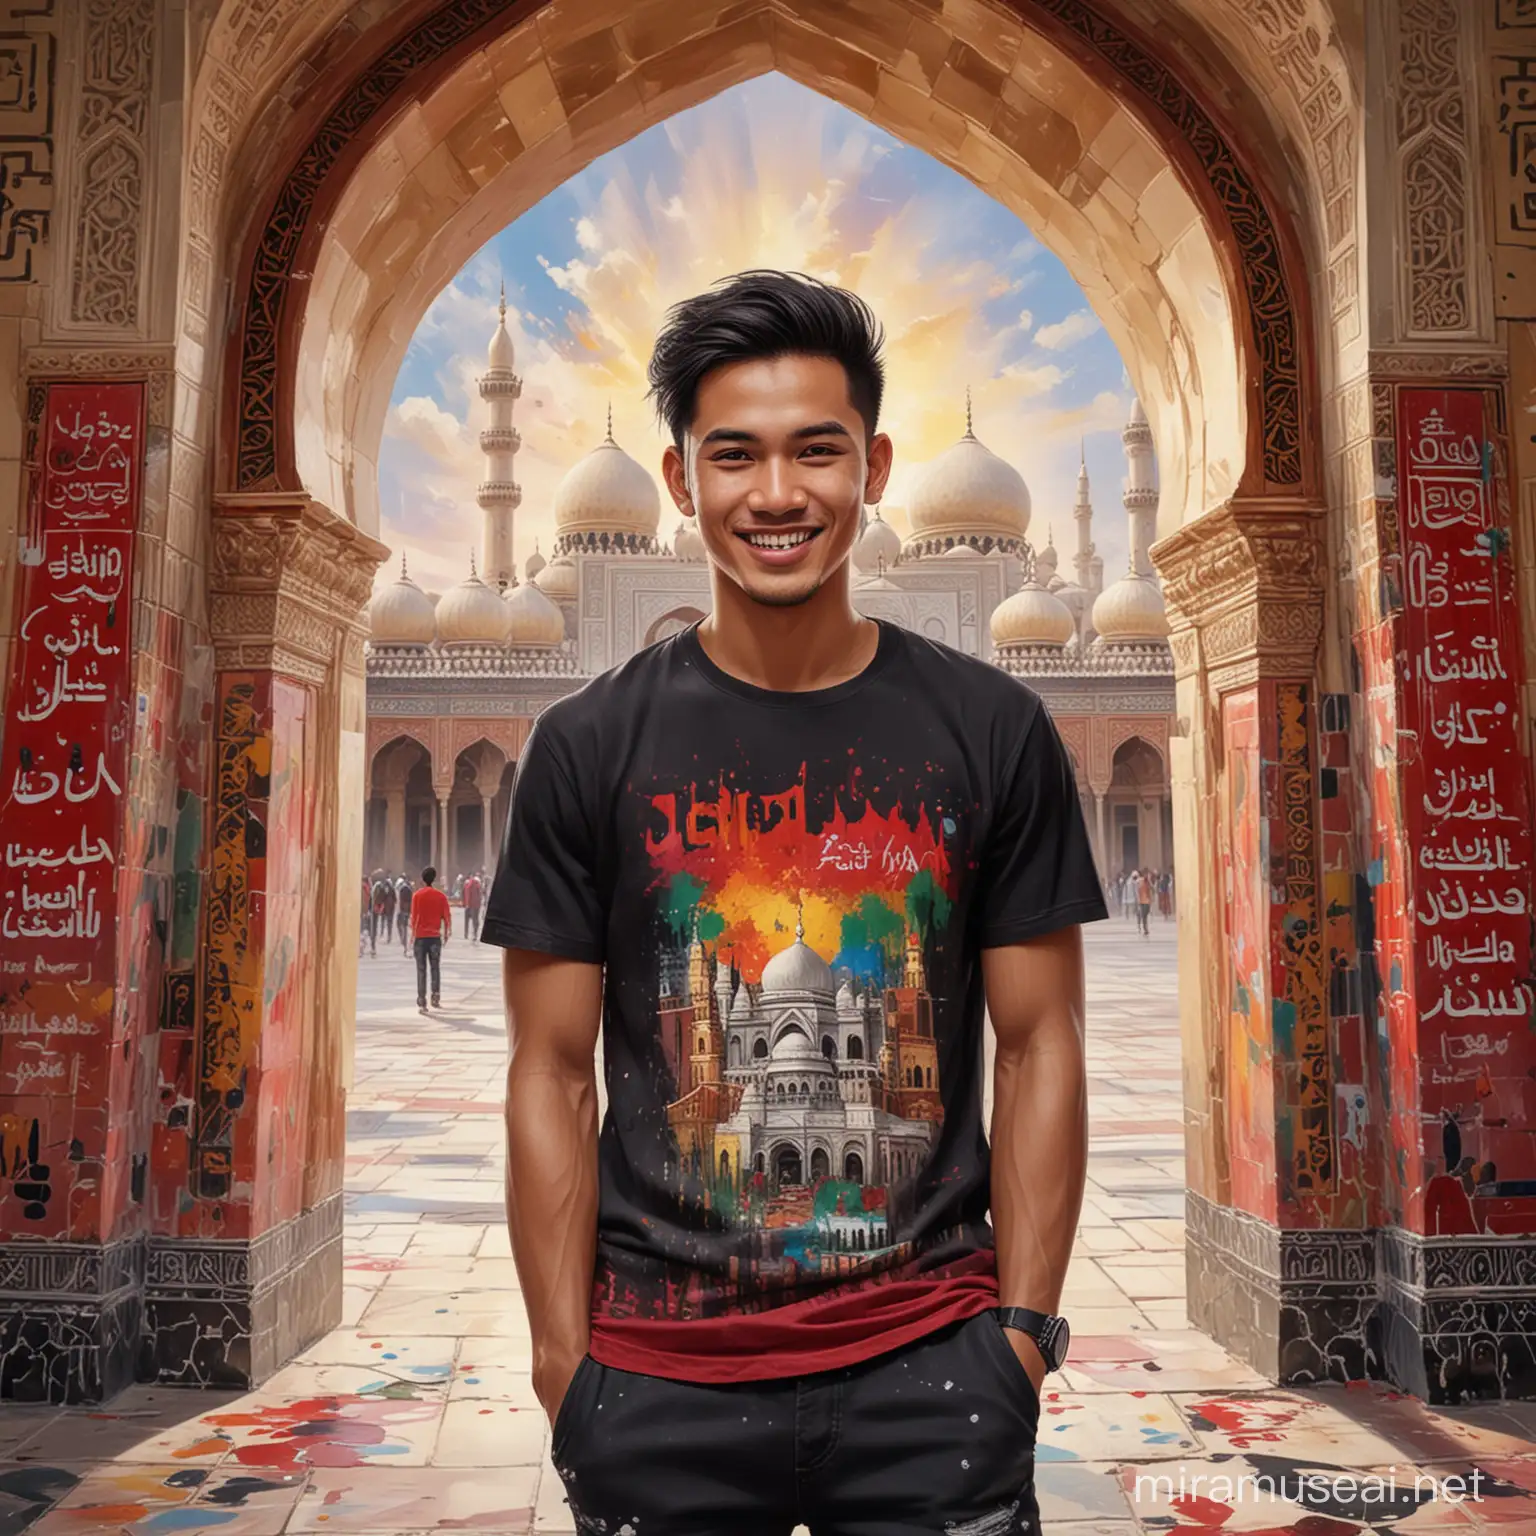 Indonesian Artist with JENDOL MAN Logo in Colorful 3D Oil Paint Background